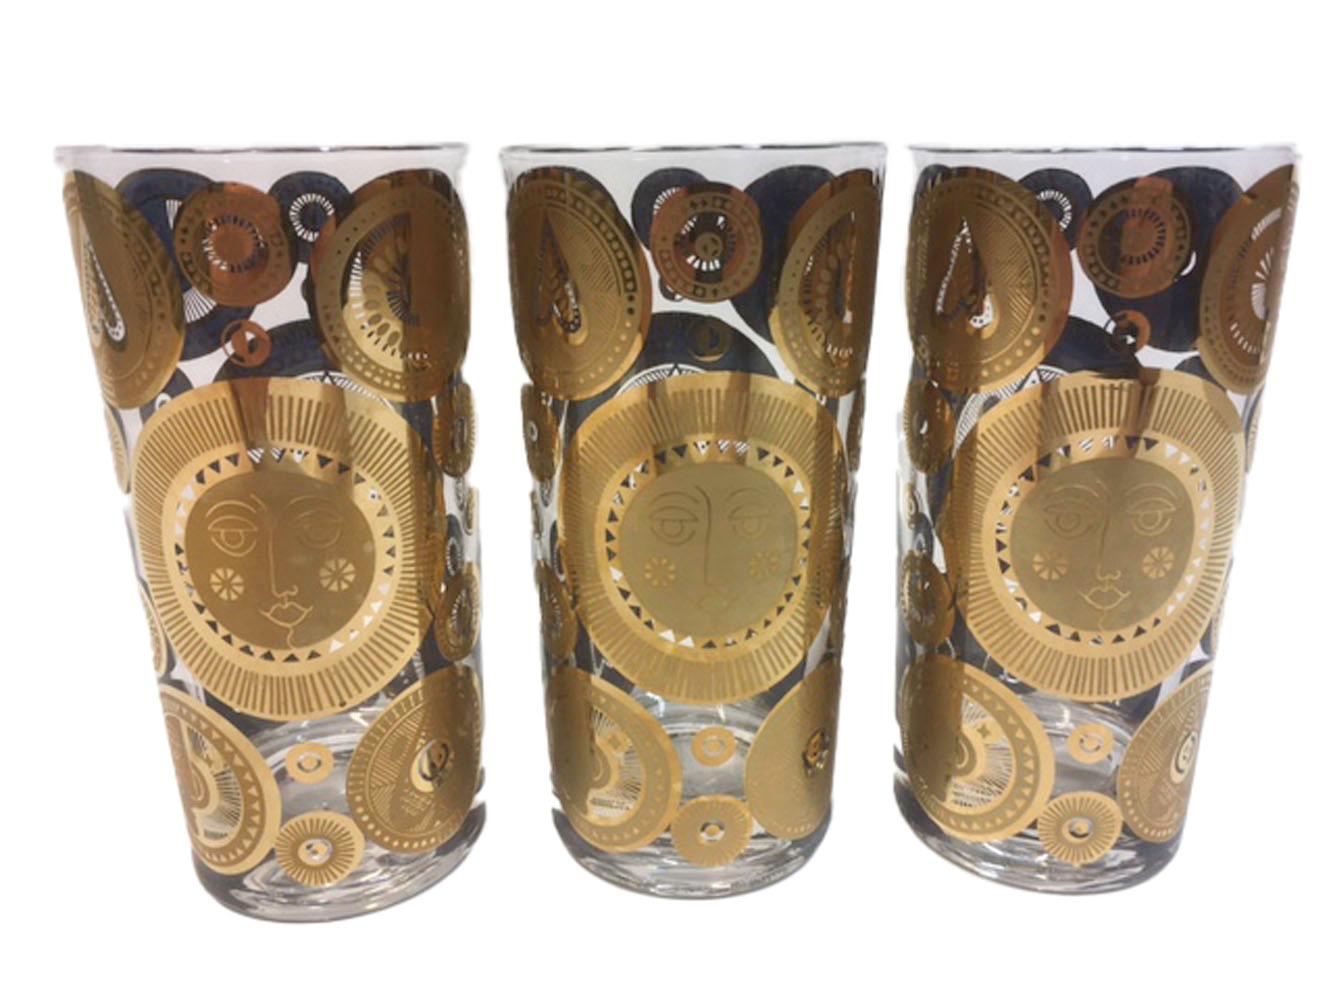 Set of 6 vintage Georges Briard highball glasses with various size circles of 22k gold over blue enamel. The circles embossed and pierced with designs of the sun and leaves with only the gold visible on the exterior with the design visible in the